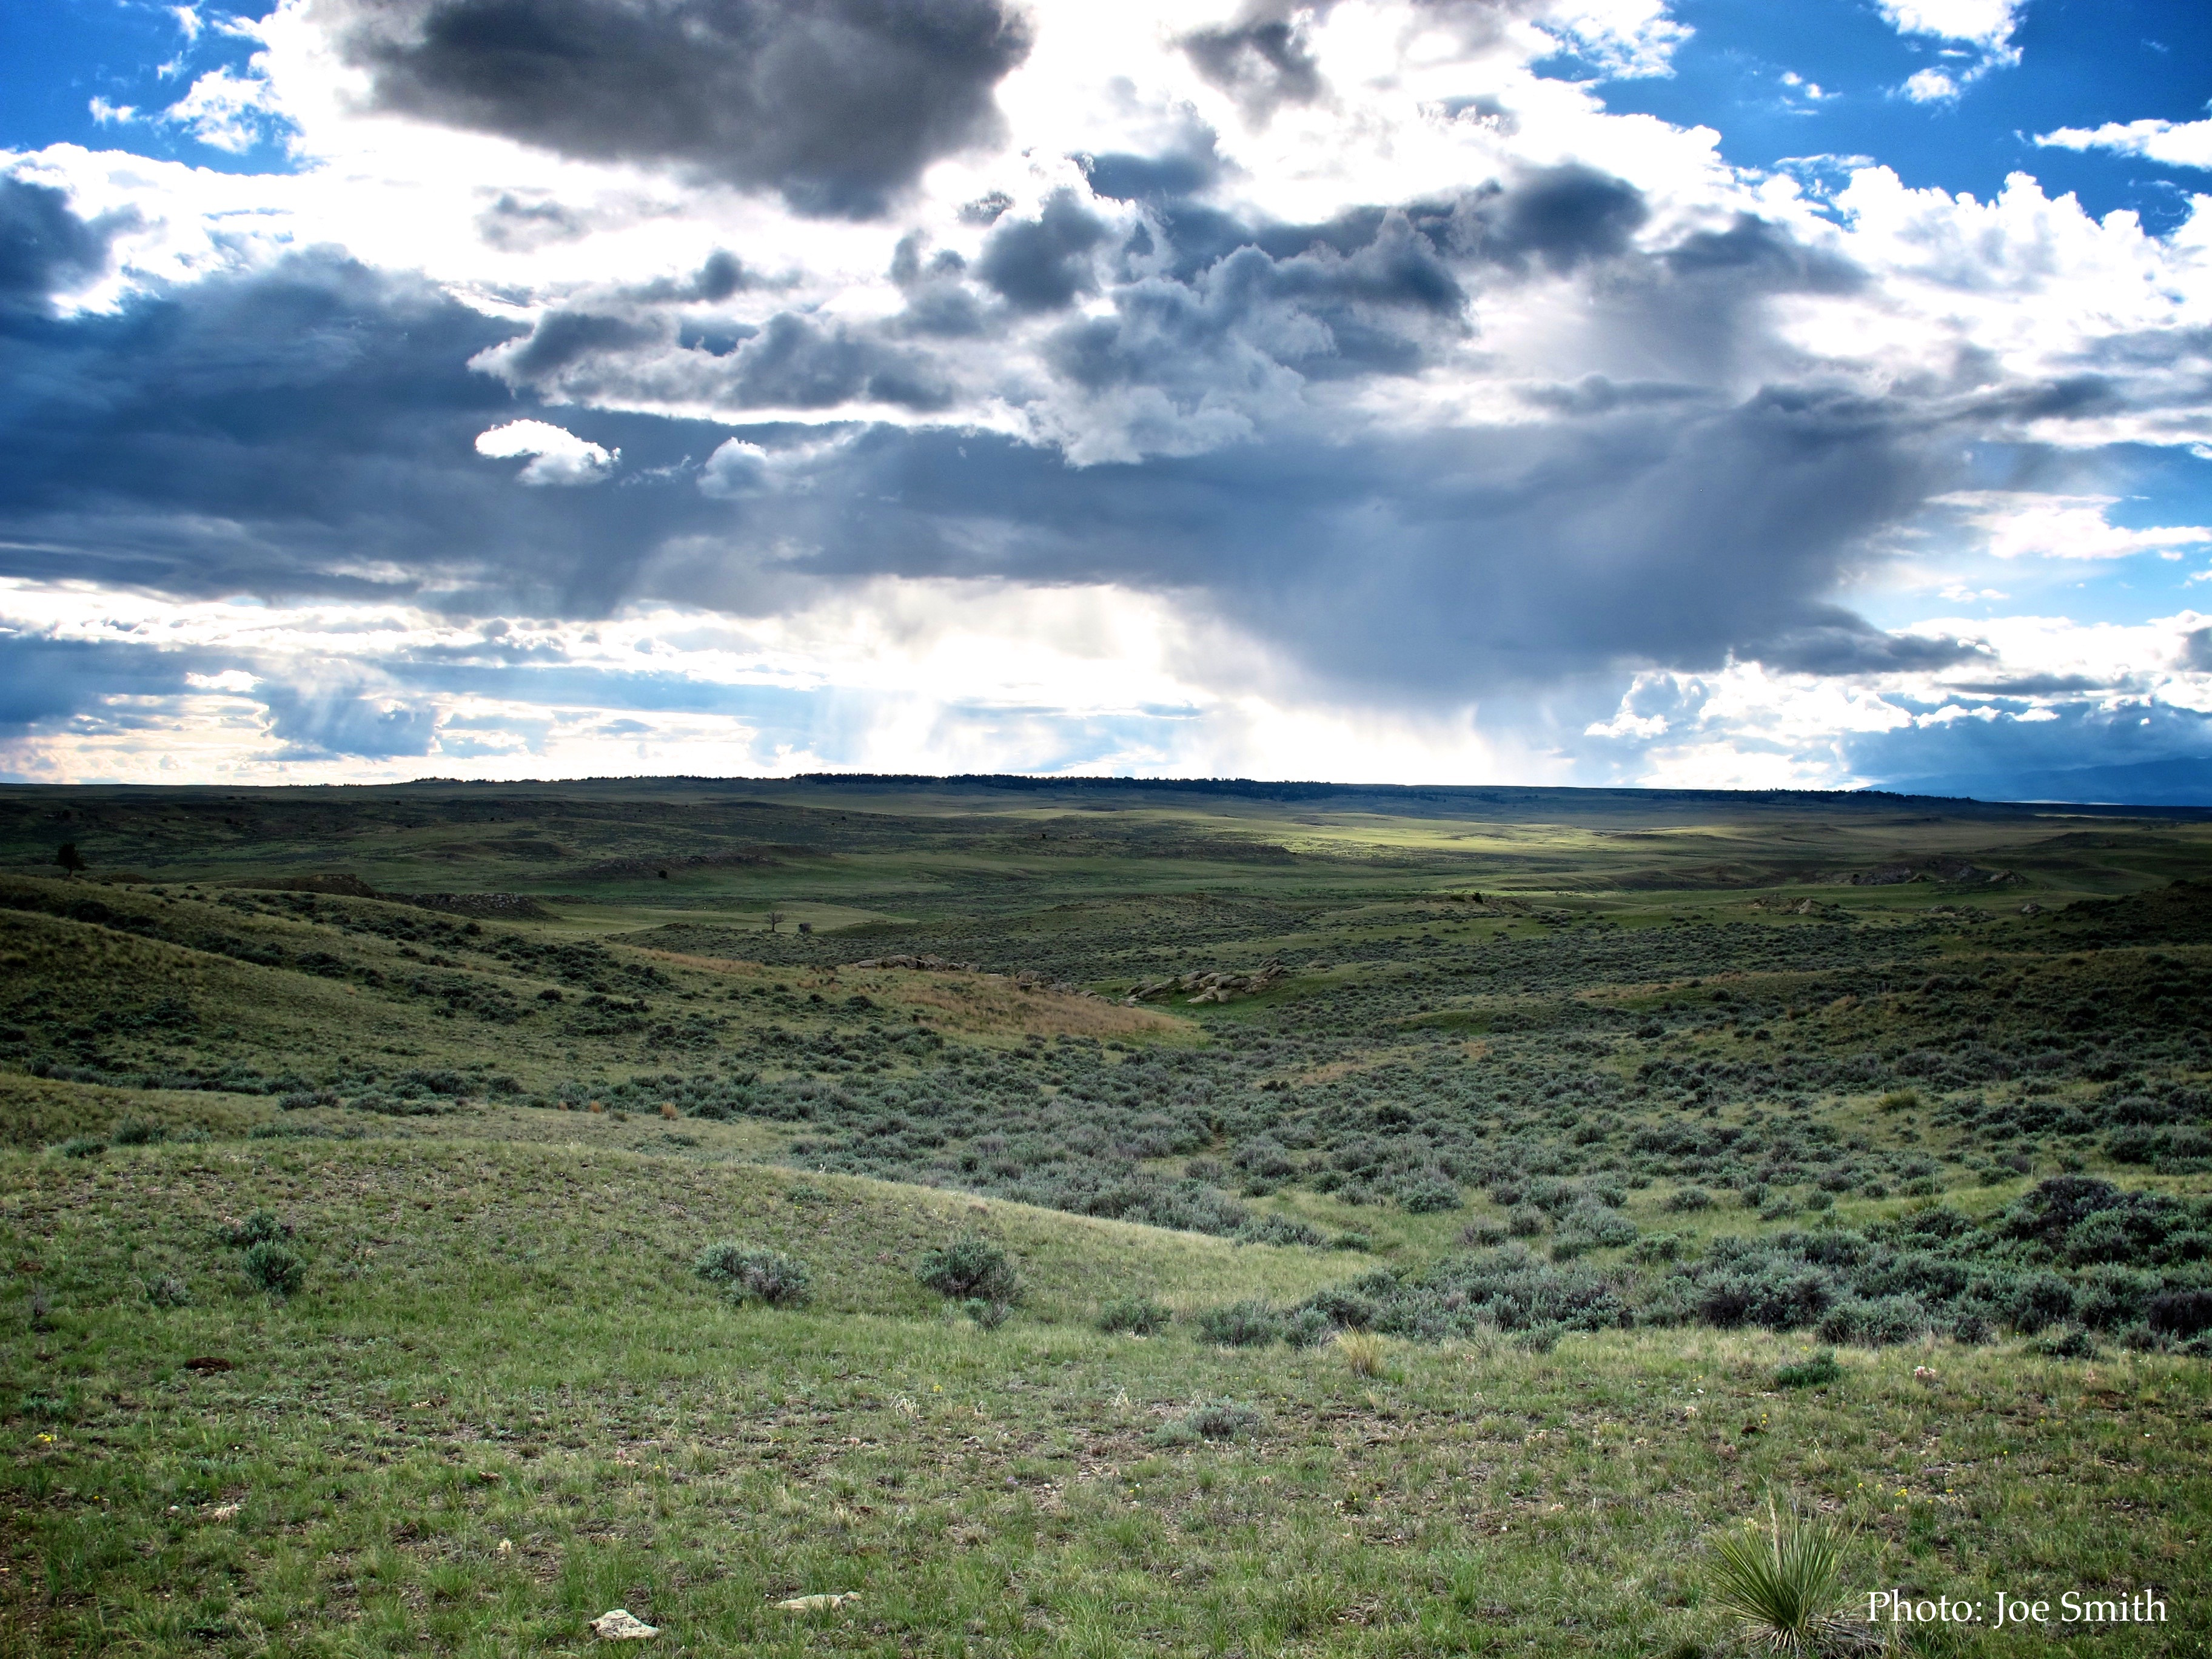 Time-tested range management principles promote diverse and resilient plant communities including native grasses, ensuring sage grouse and other wildlife have the resources they need. Photo by Brianna Randall